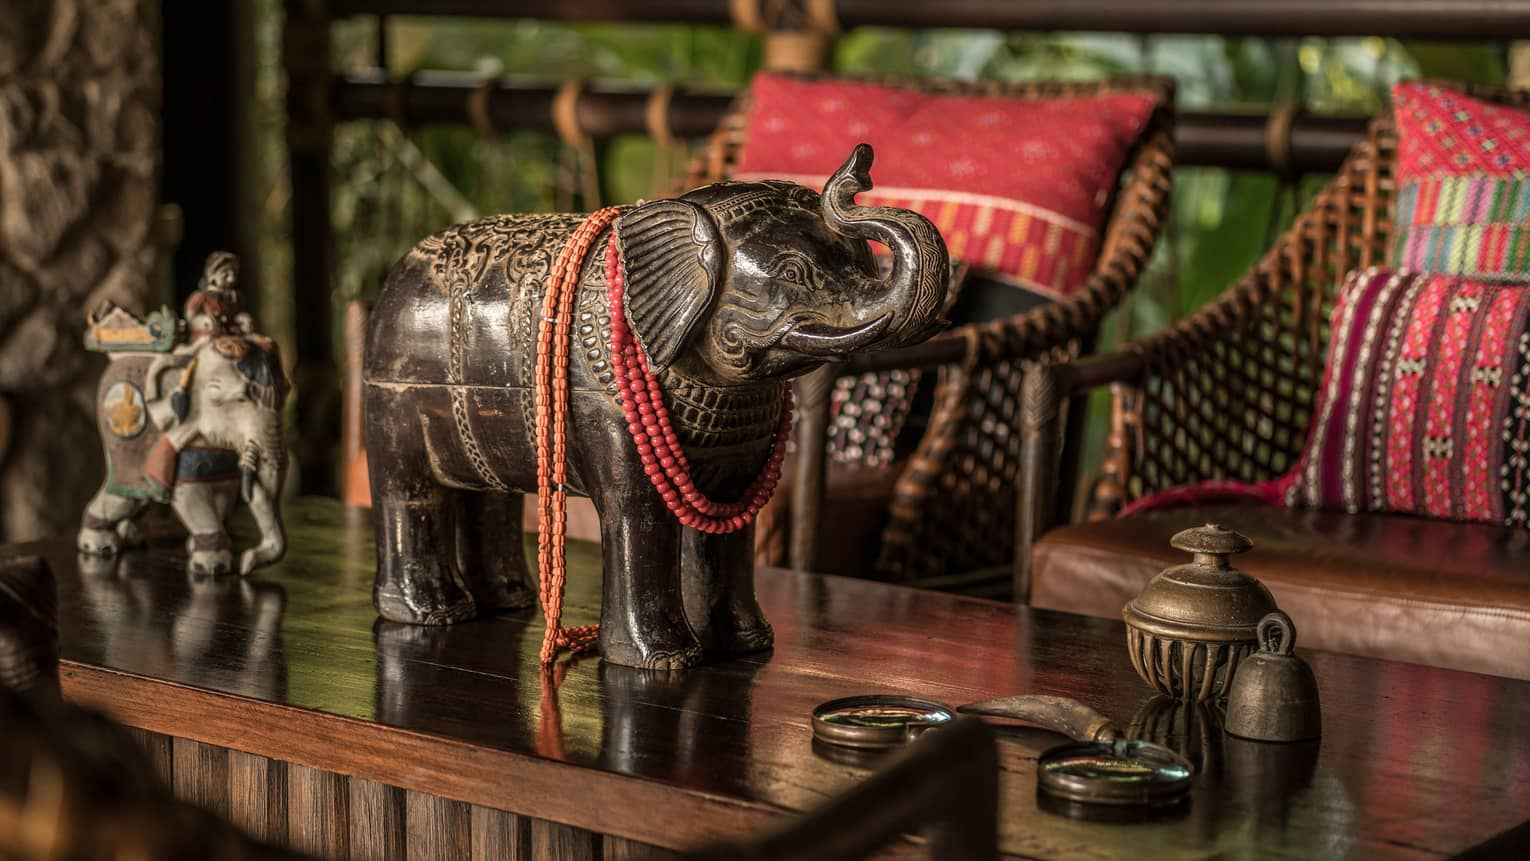 Elephant statue on wood table in front of bamboo sofa with red cushions